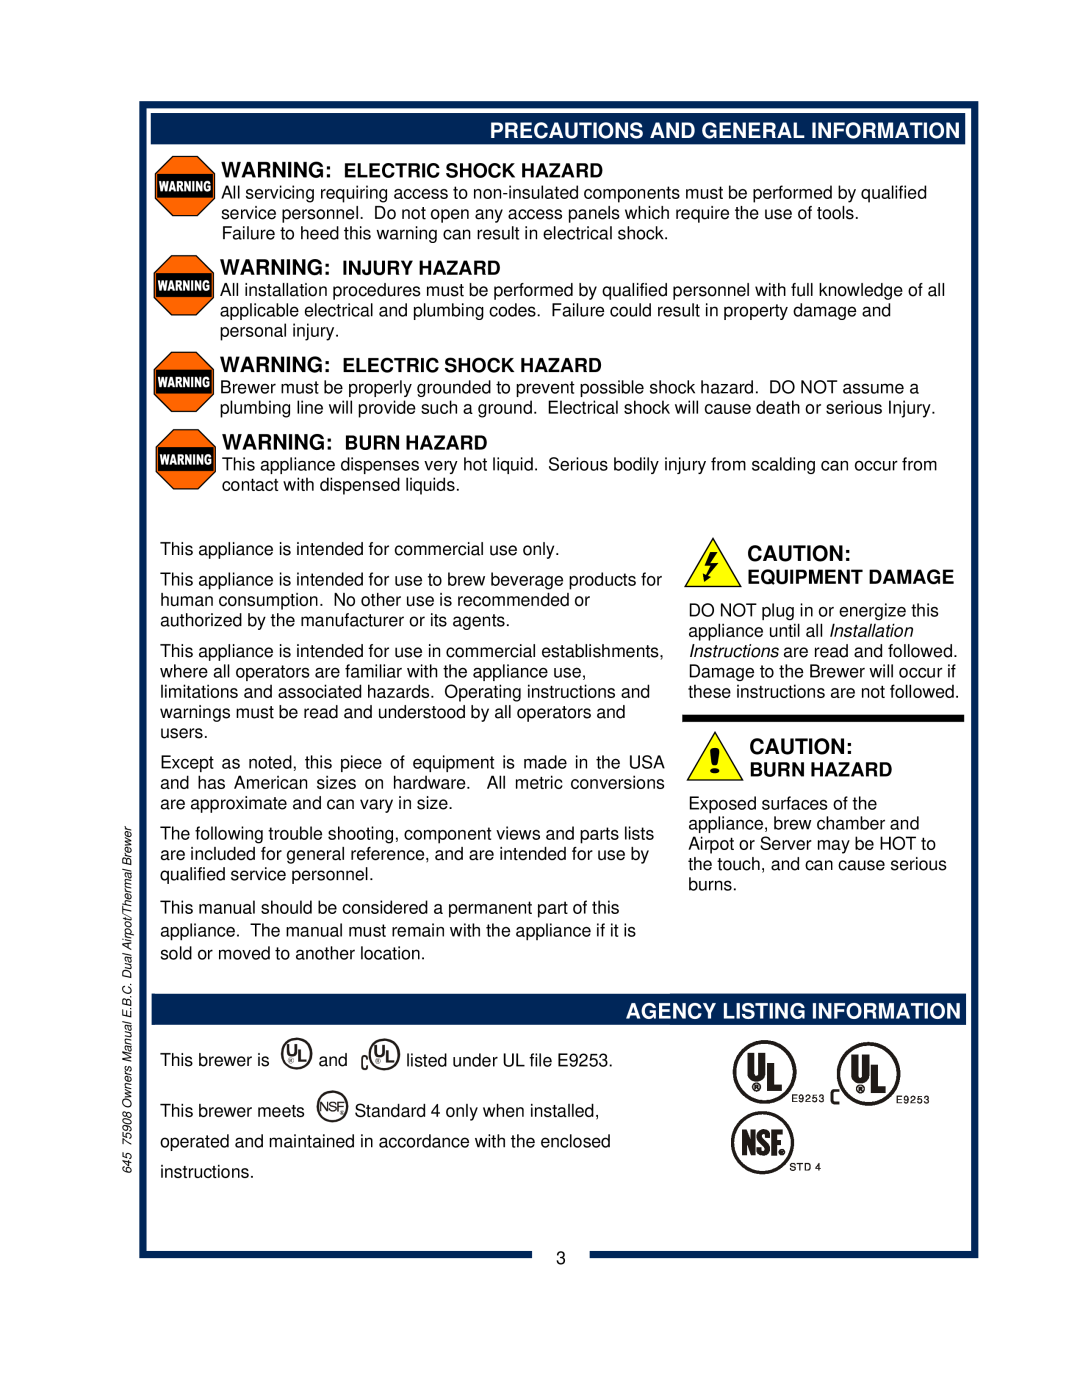 Bloomfield 1092, 1091, 1090 Precautions And General Information, Agency Listing Information, Warning Electric Shock Hazard 